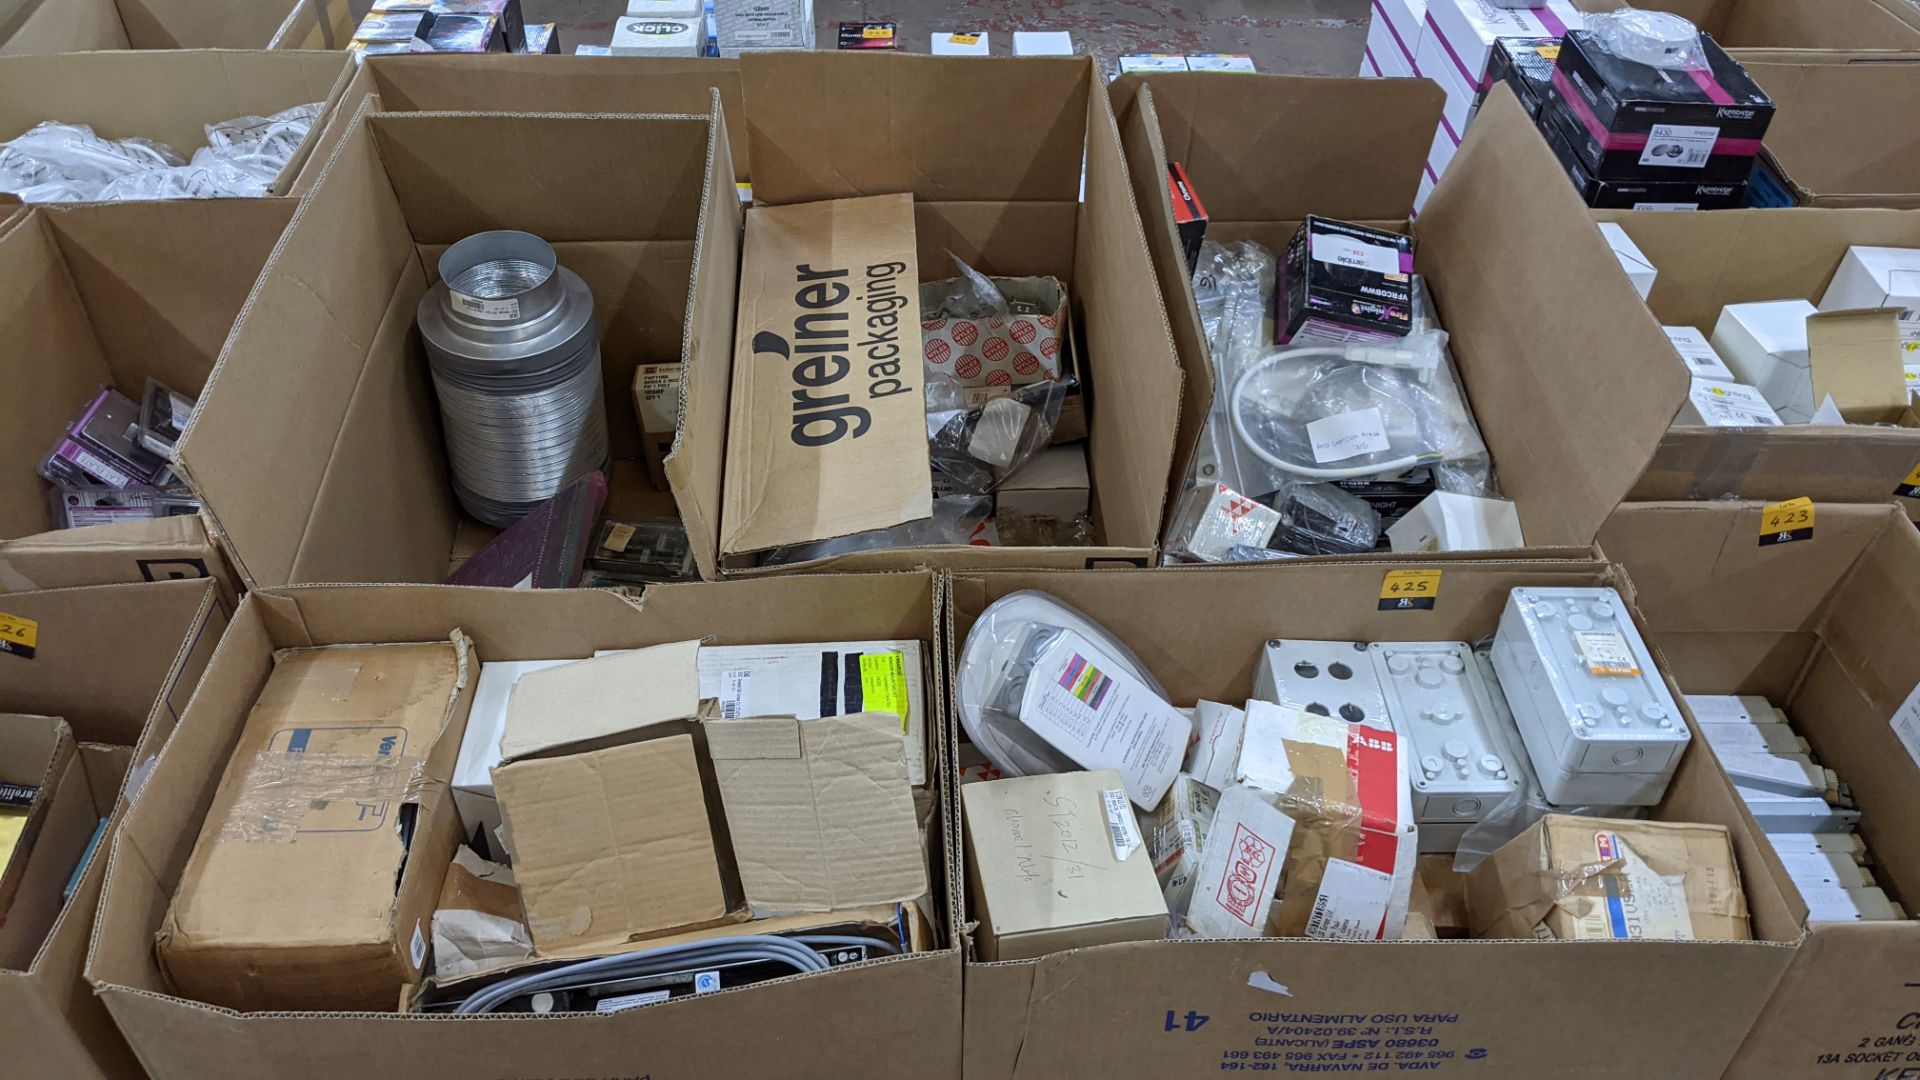 5 boxes of assorted miscellaneous electrical items - the contents of a pallet